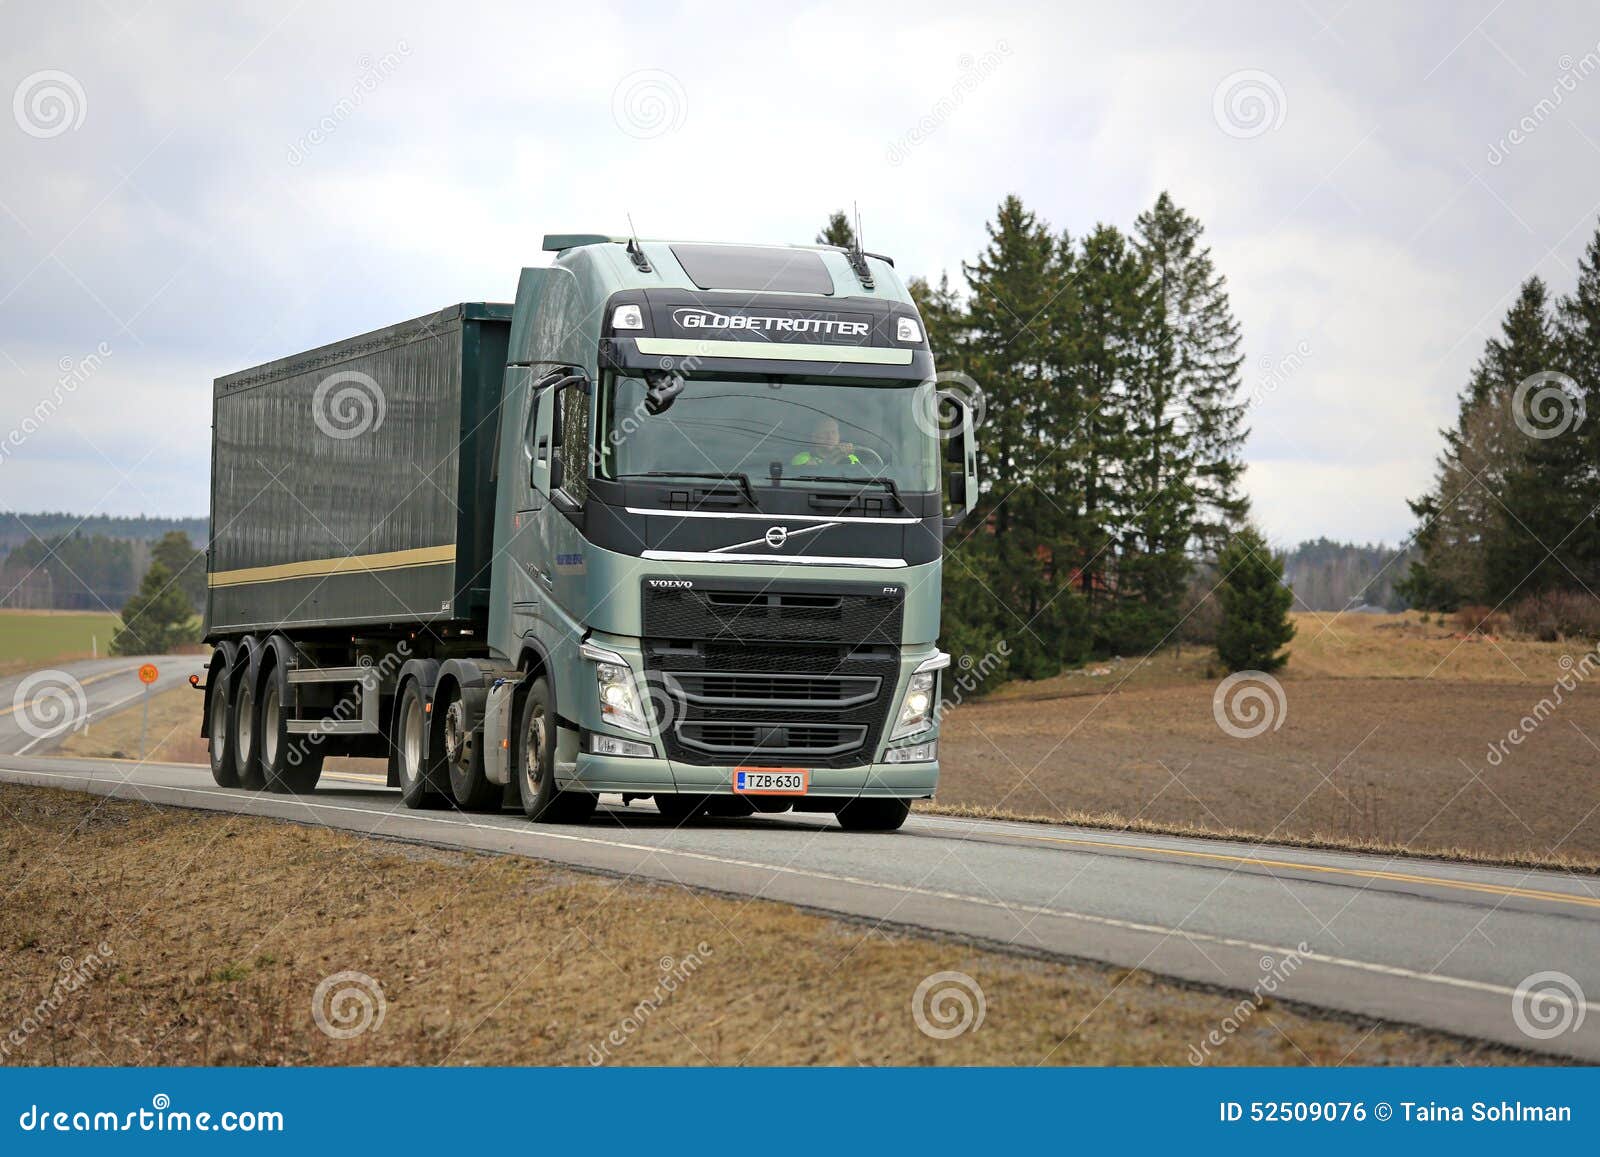 Volvo Fh 500 Semi Truck With Globetrotter Cab On The Road